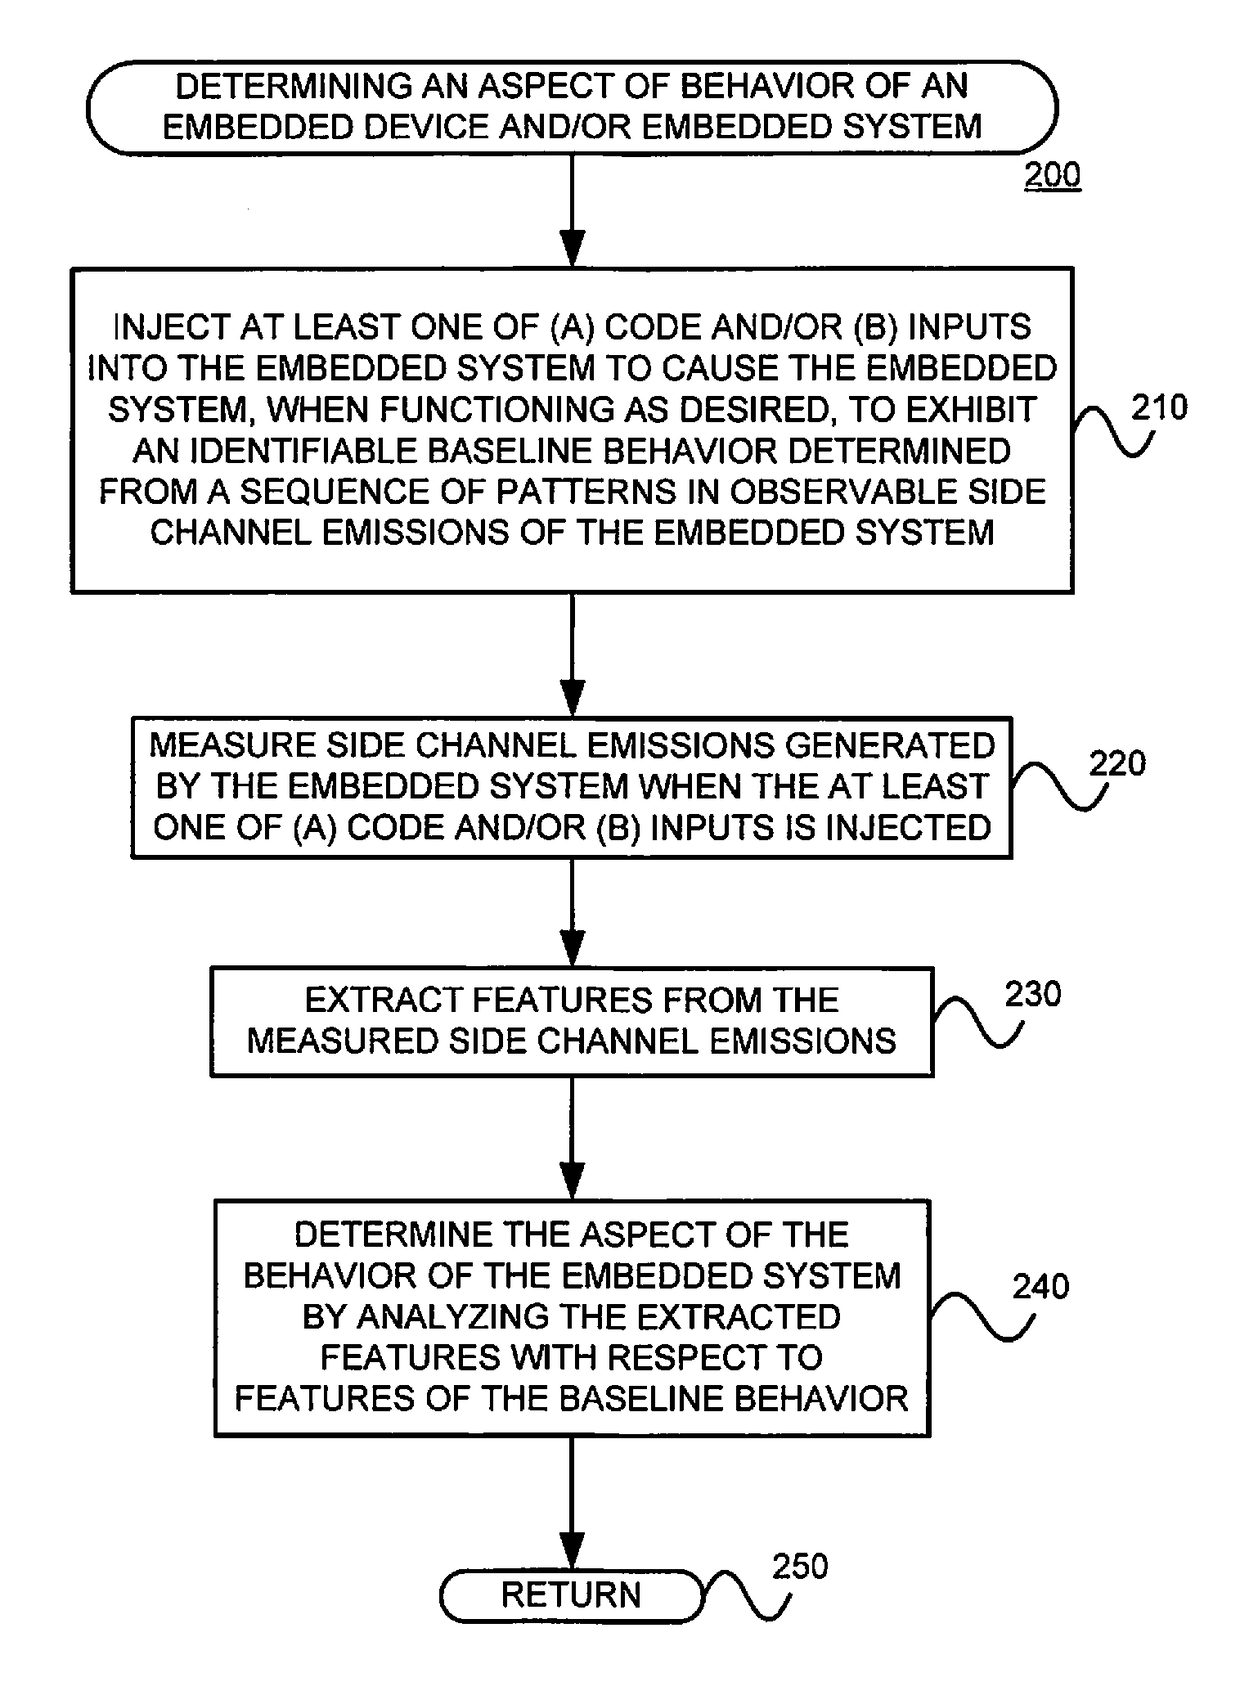 Determining an aspect of behavior of an embedded device such as, for example, detecting unauthorized modifications of the code and/or behavior of an embedded device